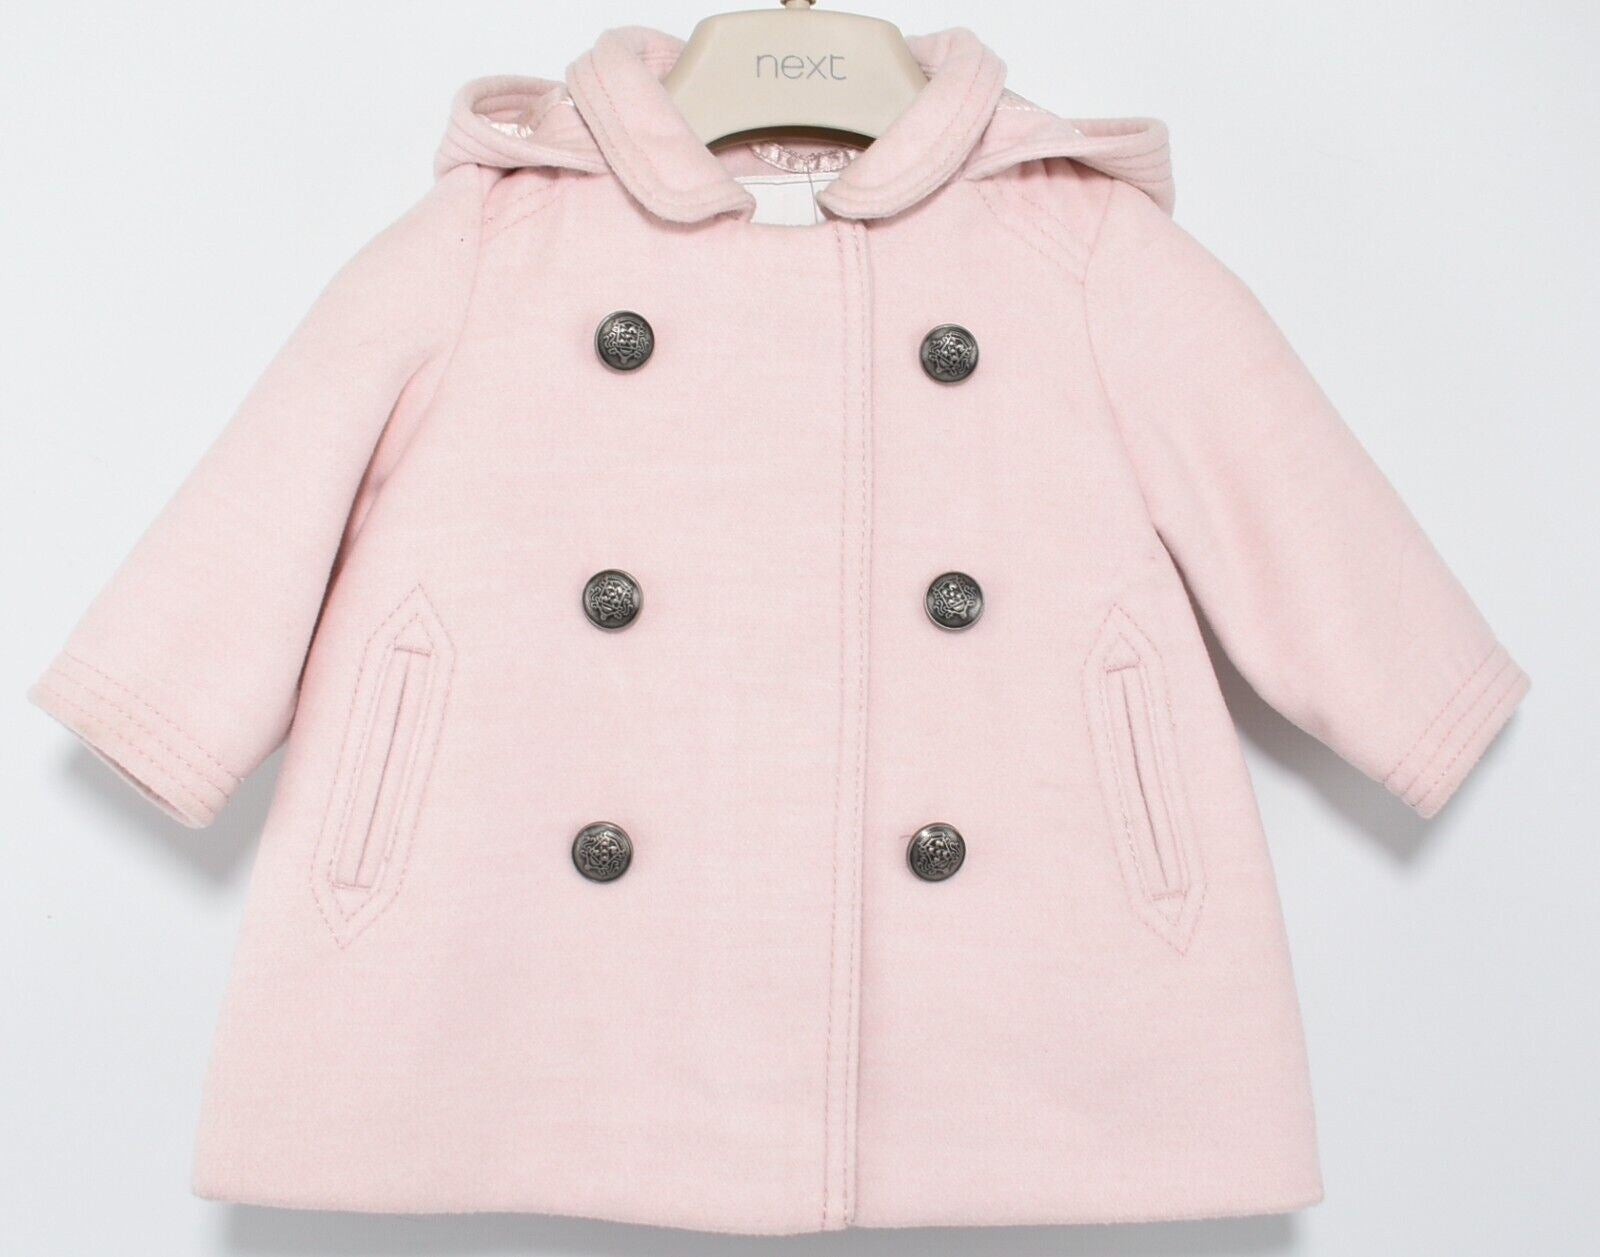 NEXT Baby Girls Hooded Coat, Light Pink, size 3-6 months